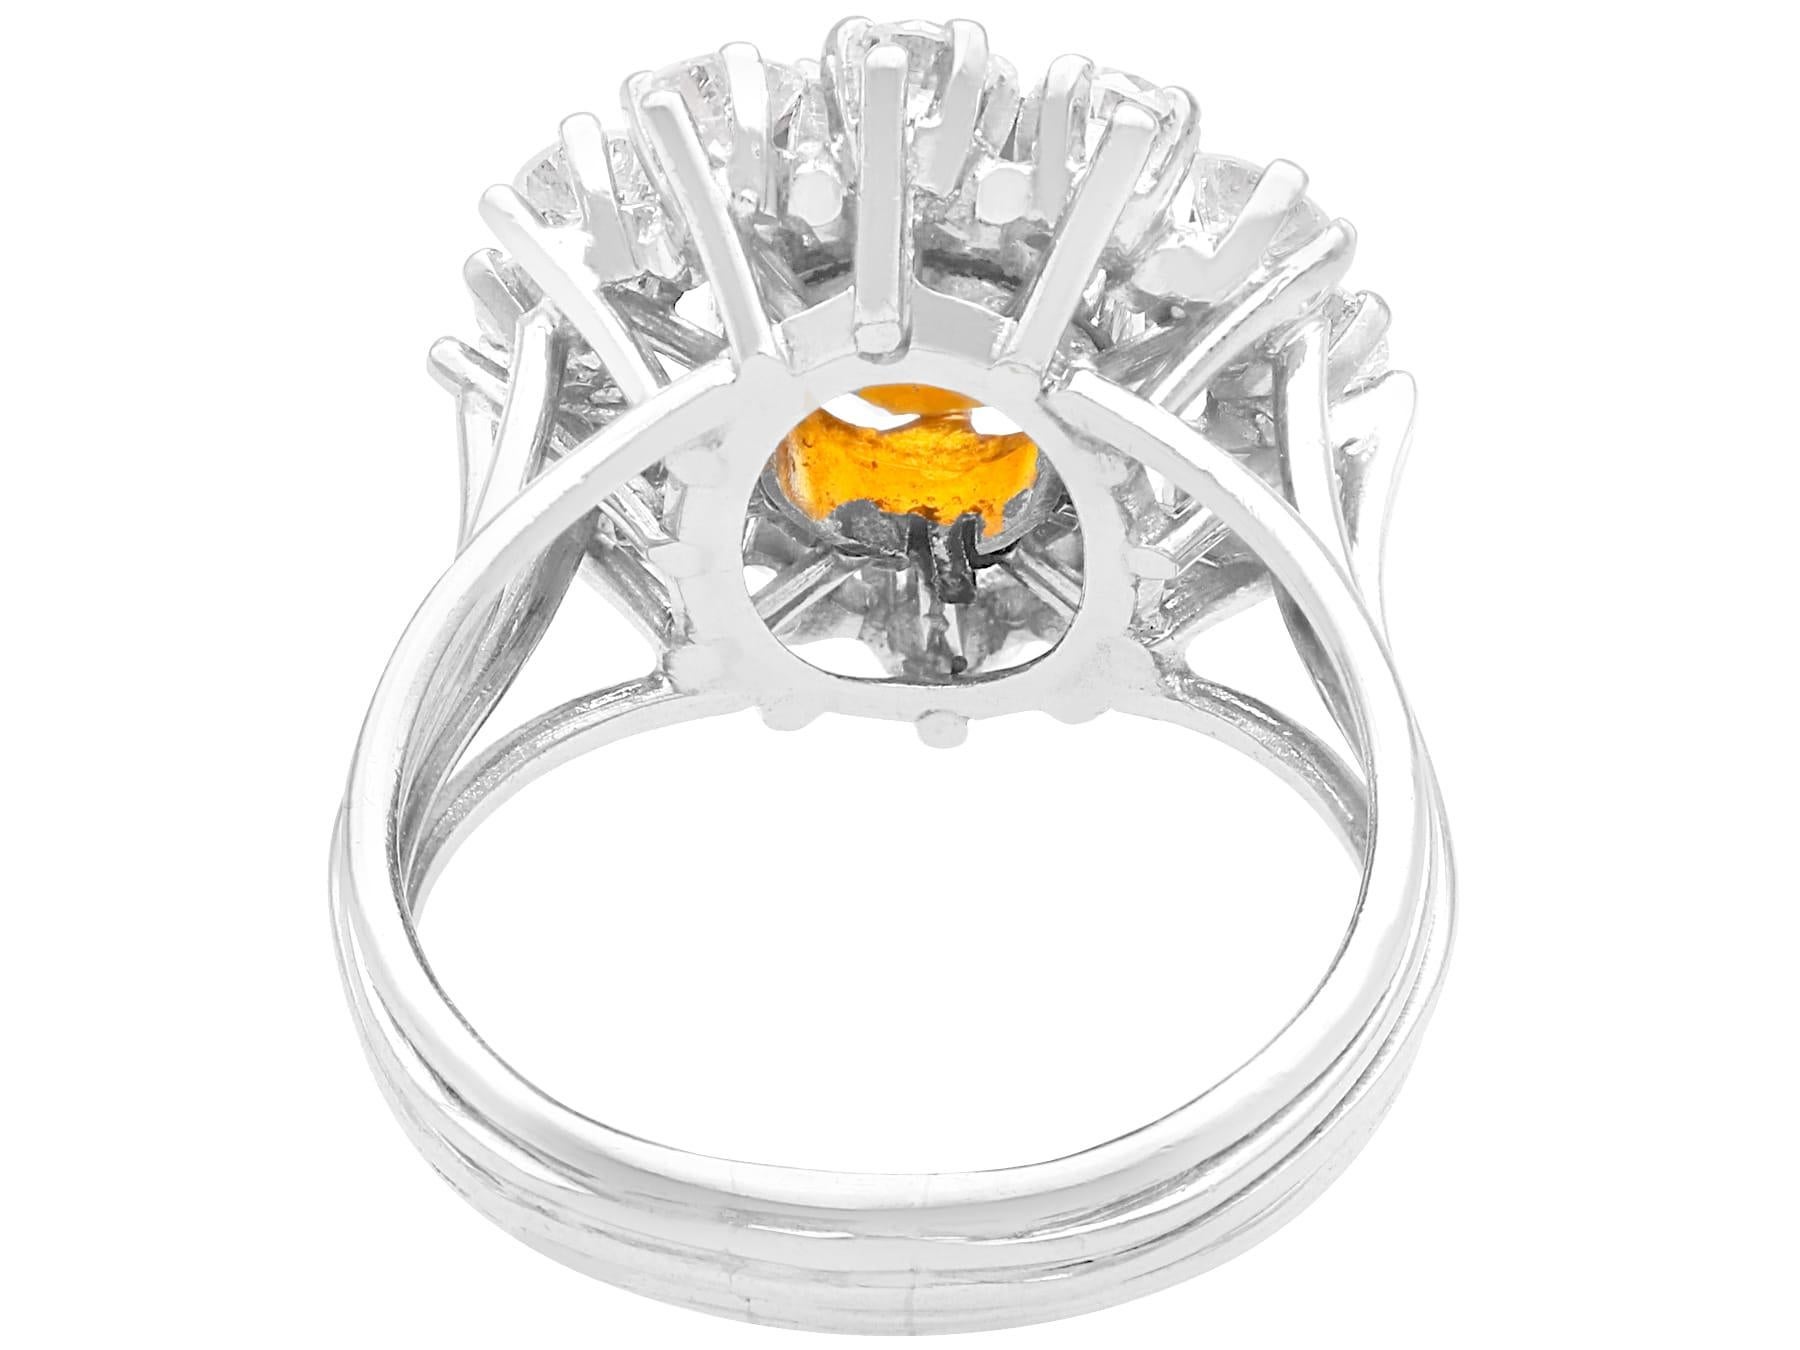 1950s 2.83 carat Citrine and 1.30 carat Diamond Cluster Ring in Platinum In Excellent Condition For Sale In Jesmond, Newcastle Upon Tyne